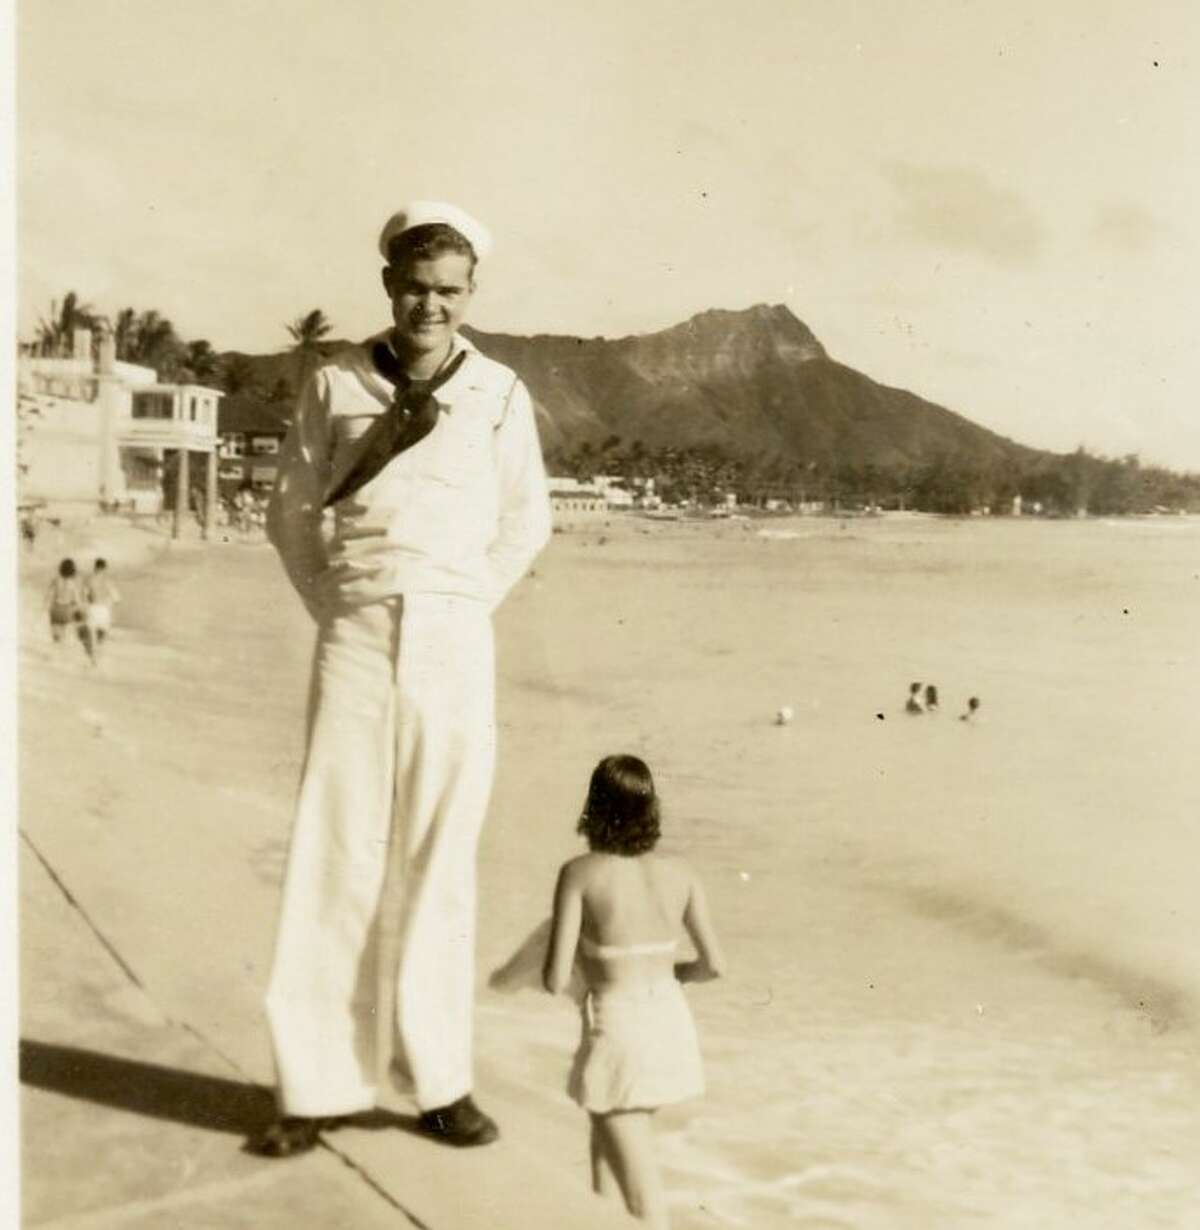 I looked at the photographs to discover a young sailor on leave on the beaches of Honolulu.